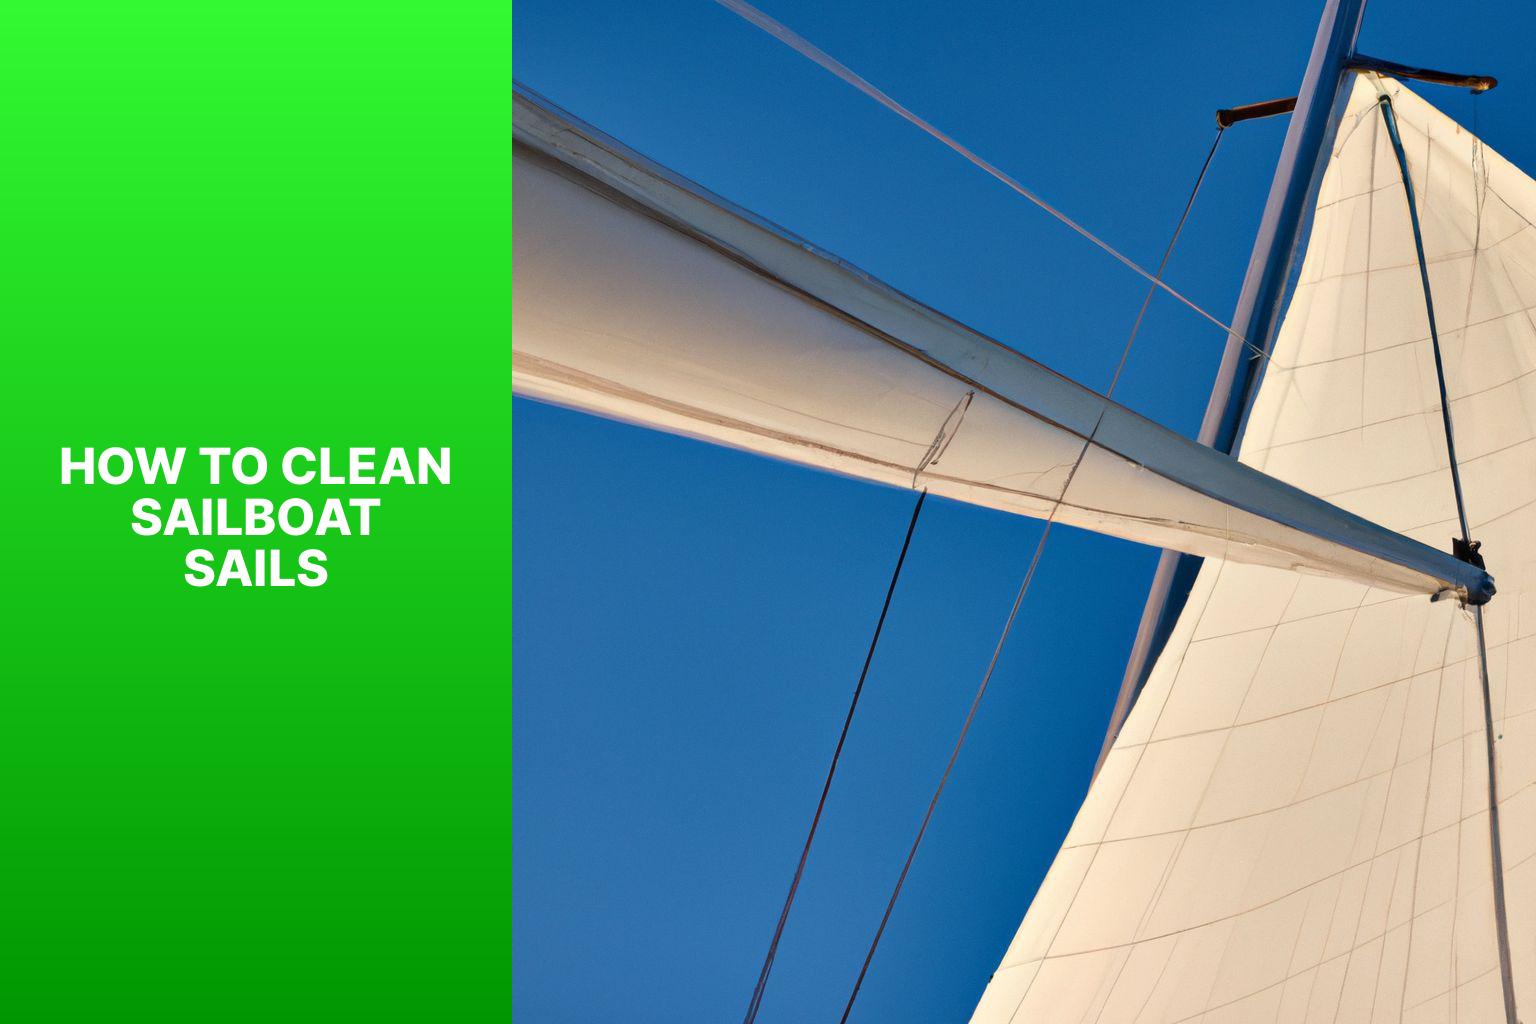 A Step-by-Step Guide to Safely Clean Sailboat Sails for Optimal Performance